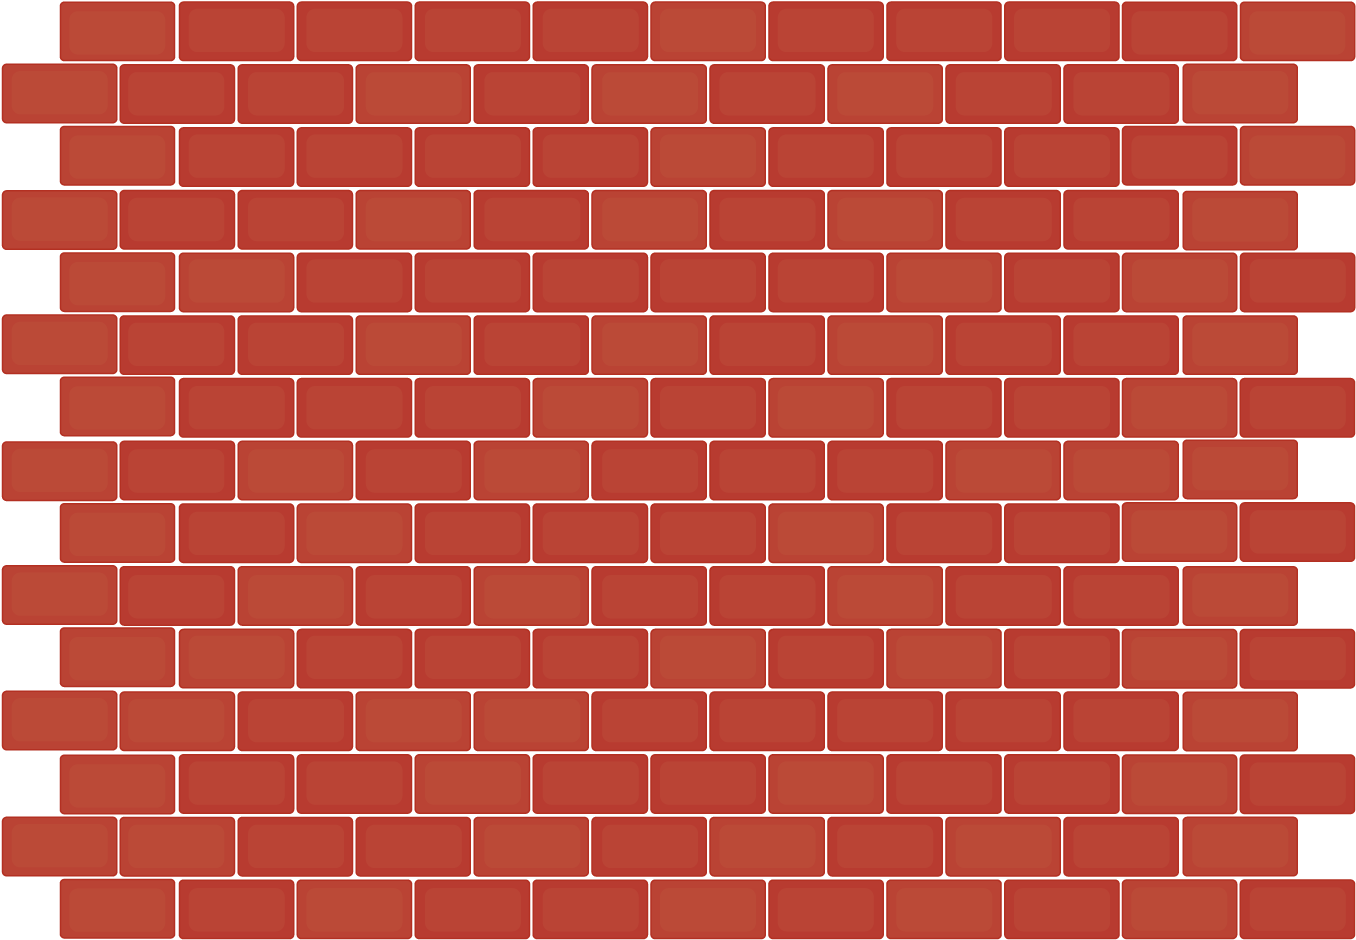 A Red Brick Wall With Black Dots